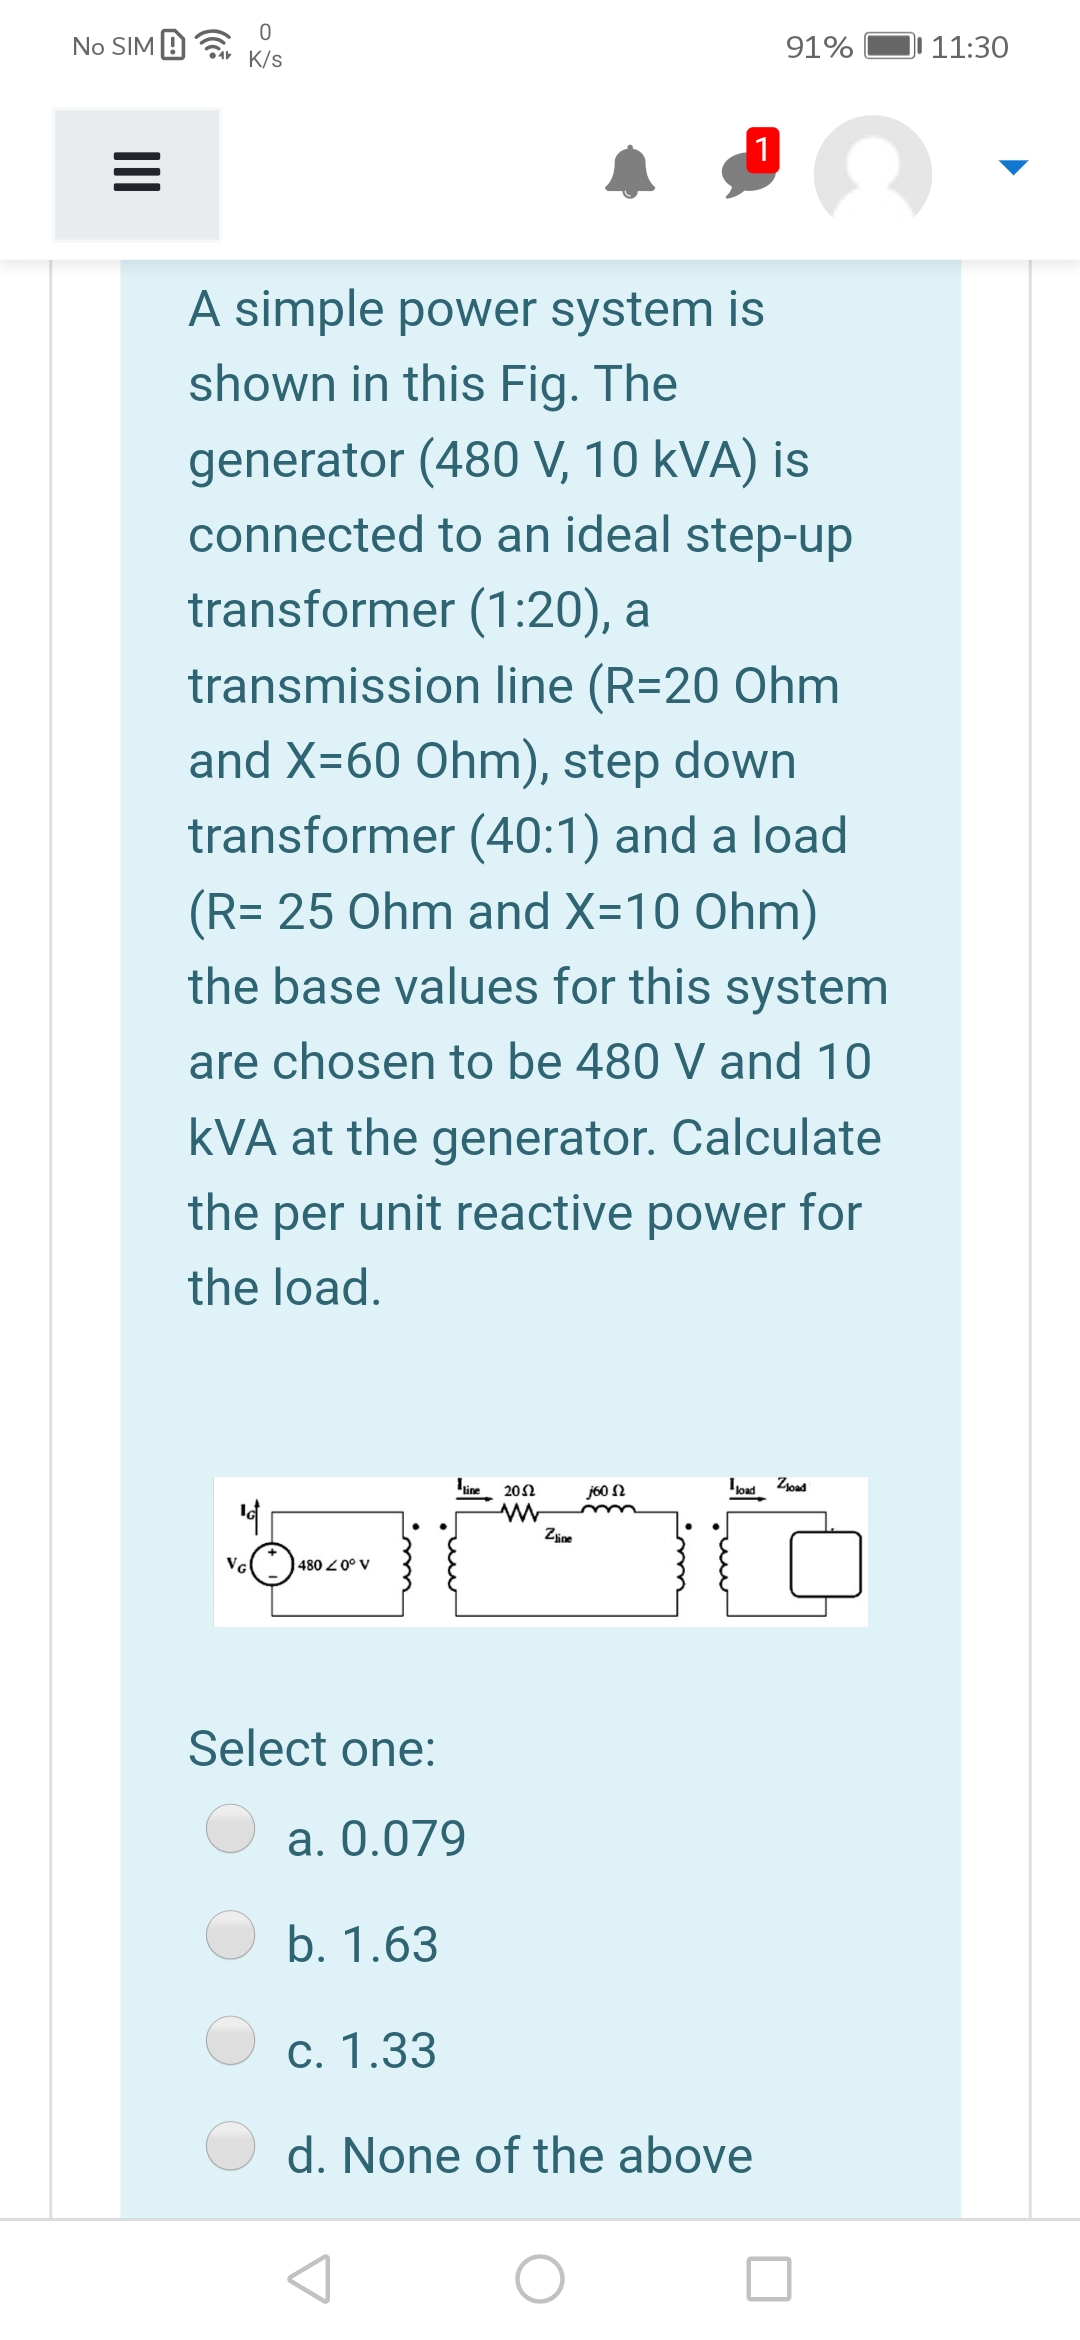 No SIM 9
91%
JI 11:30
K/s
1
A simple power system is
shown in this Fig. The
generator (480 V, 10 kVA) is
connected to an ideal step-up
transformer (1:20), a
transmission line (R=20 Ohm
and X=60 Ohm), step down
transformer (40:1) and a load
(R= 25 Ohm and X=10 Ohm)
the base values for this system
are chosen to be 480 V and 10
kVA at the generator. Calculate
the per unit reactive power for
the load.
line
Ioad Zoad
202
j60 N
Zine
VG
480 Z0° V
Select one:
a. 0.079
b. 1.63
c. 1.33
d. None of the above
II
